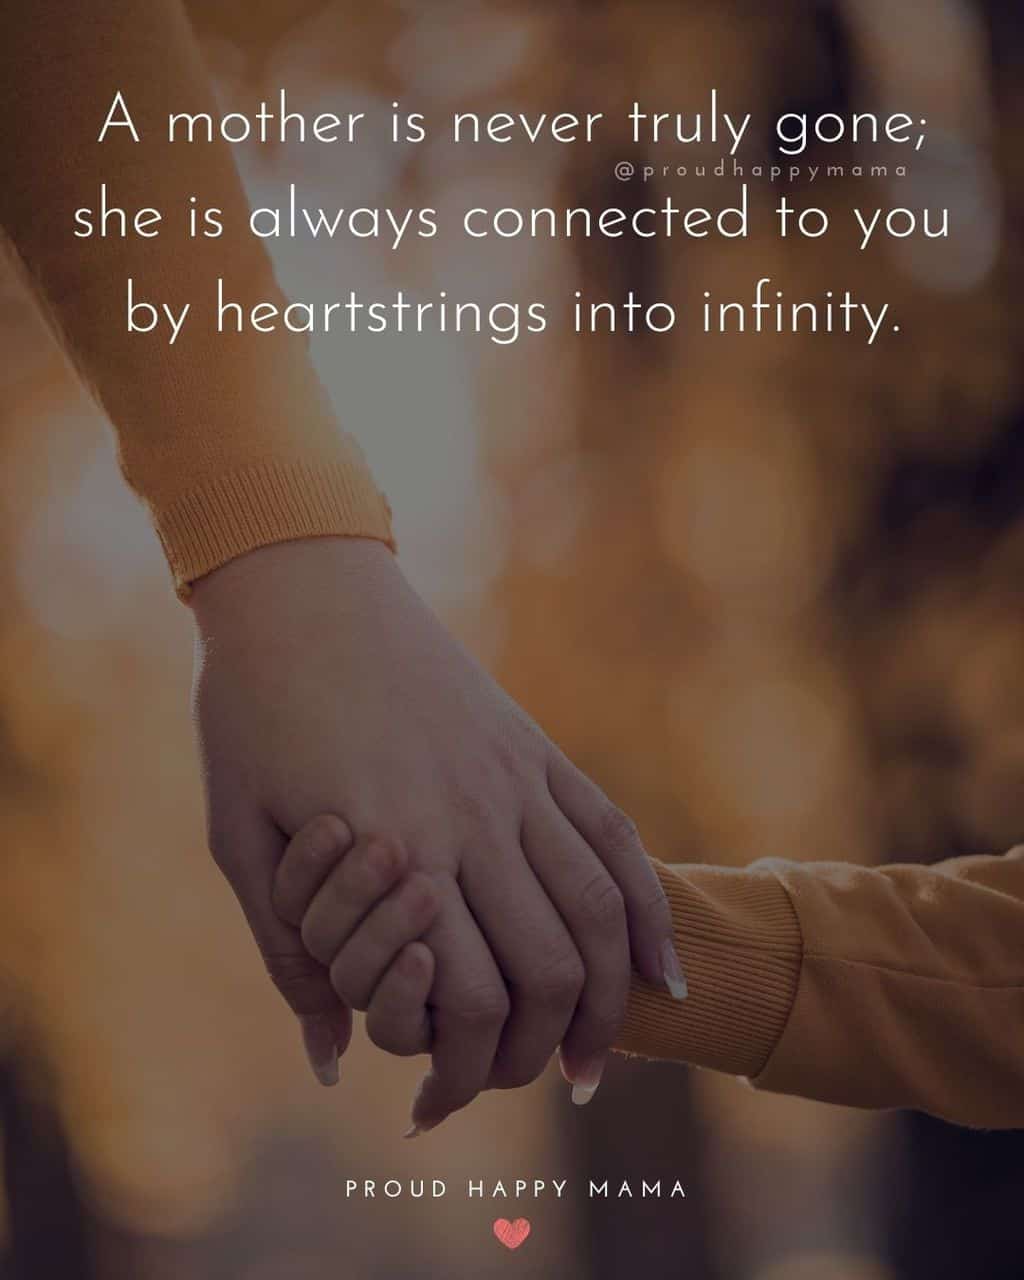 Mother holding young child's hand, with quote about missing your mom text overlay, ‘A mother is never truly gone; she is always connected to you by heartstrings into infinity.’